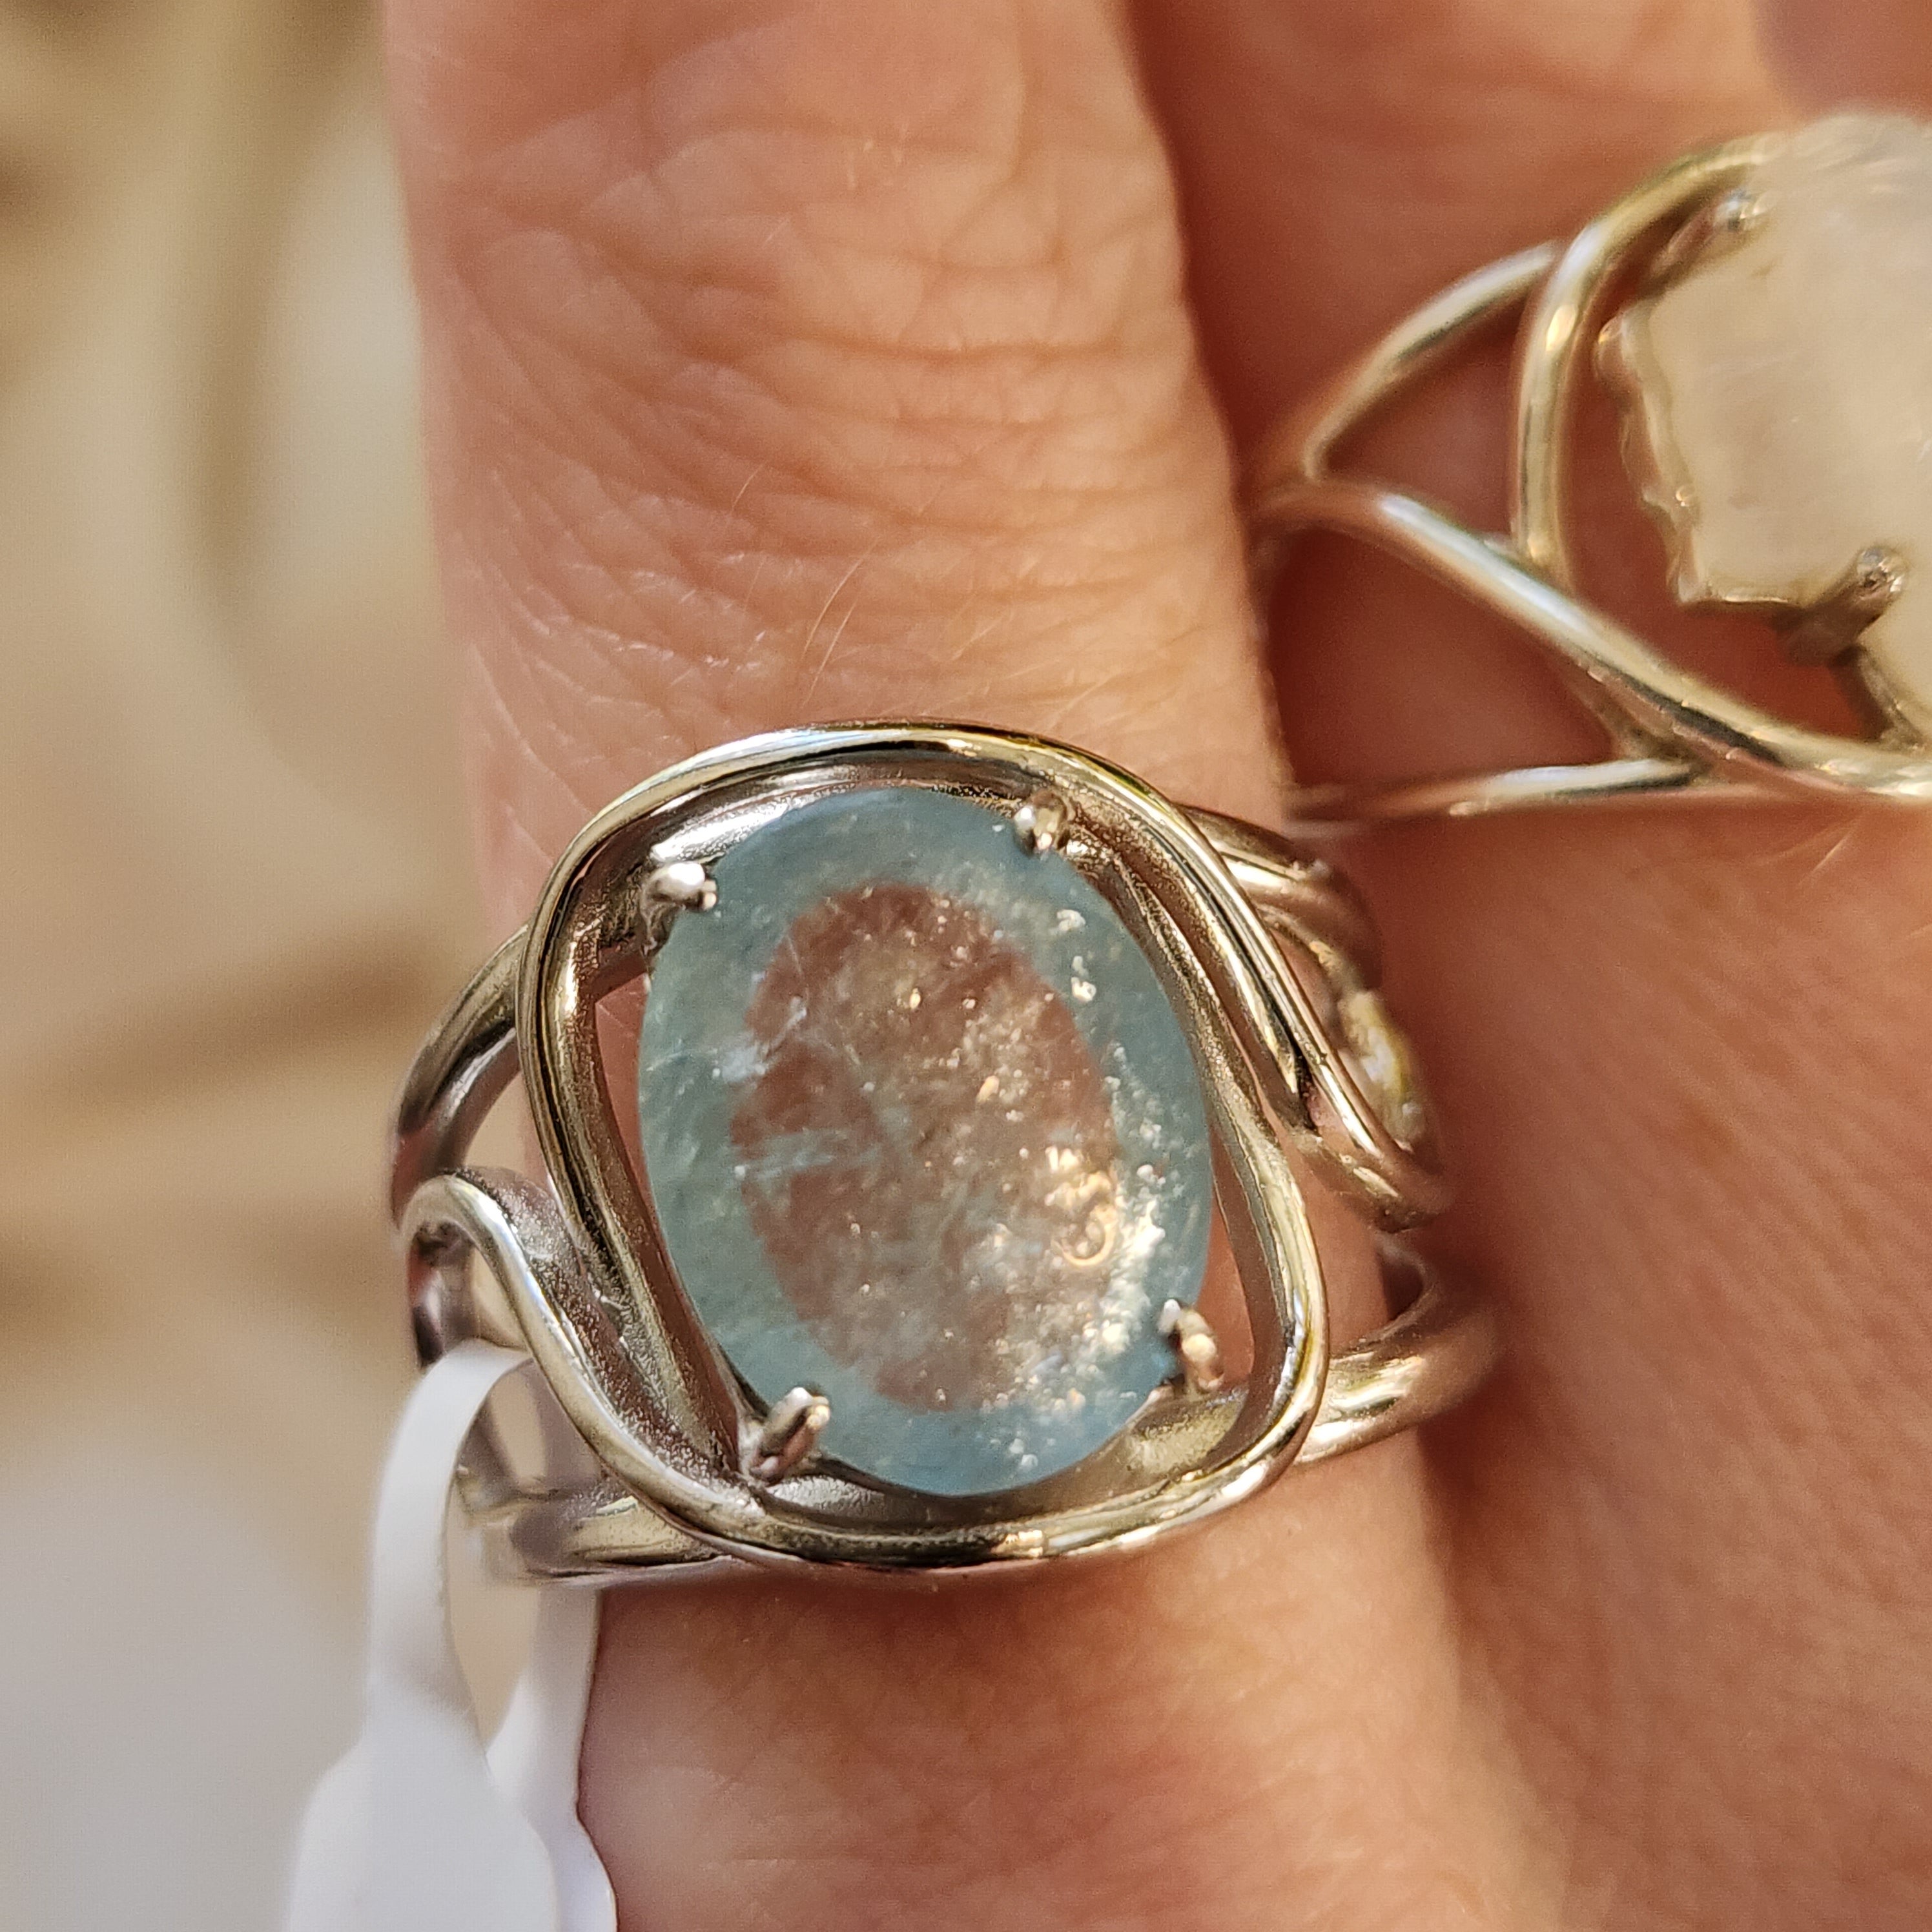 Flashy Aquamarine Finger Cuff Adjustable Ring .925 Sterling Silver for Improving Communication and Healing